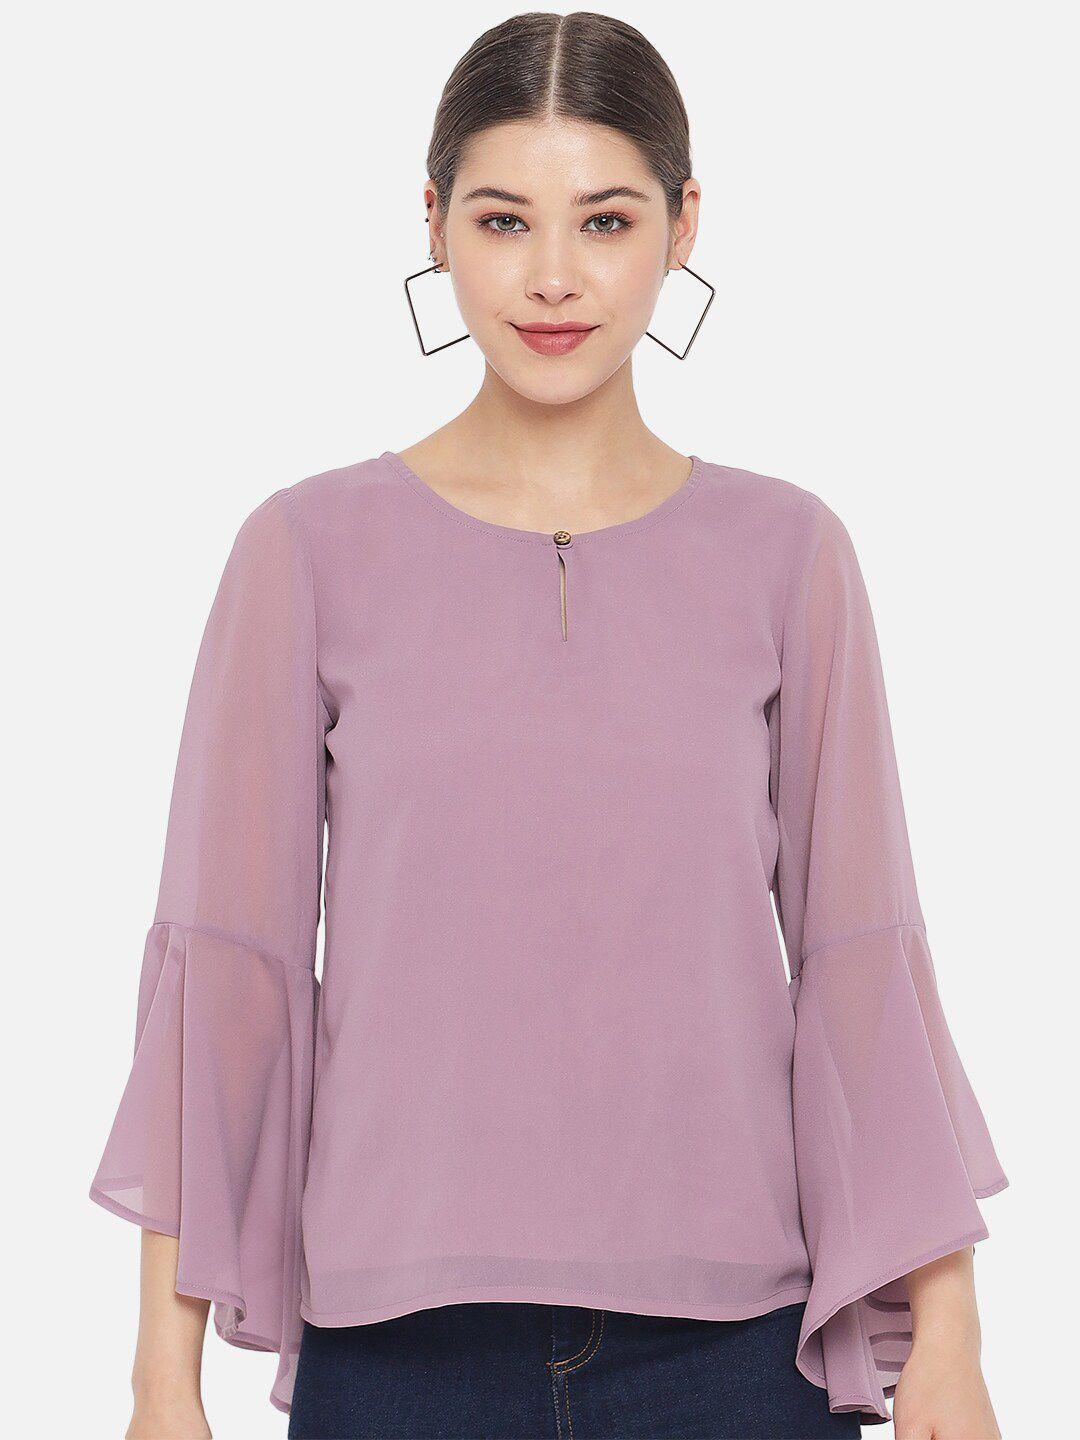 baesd-keyhole-neck-bell-sleeves-top